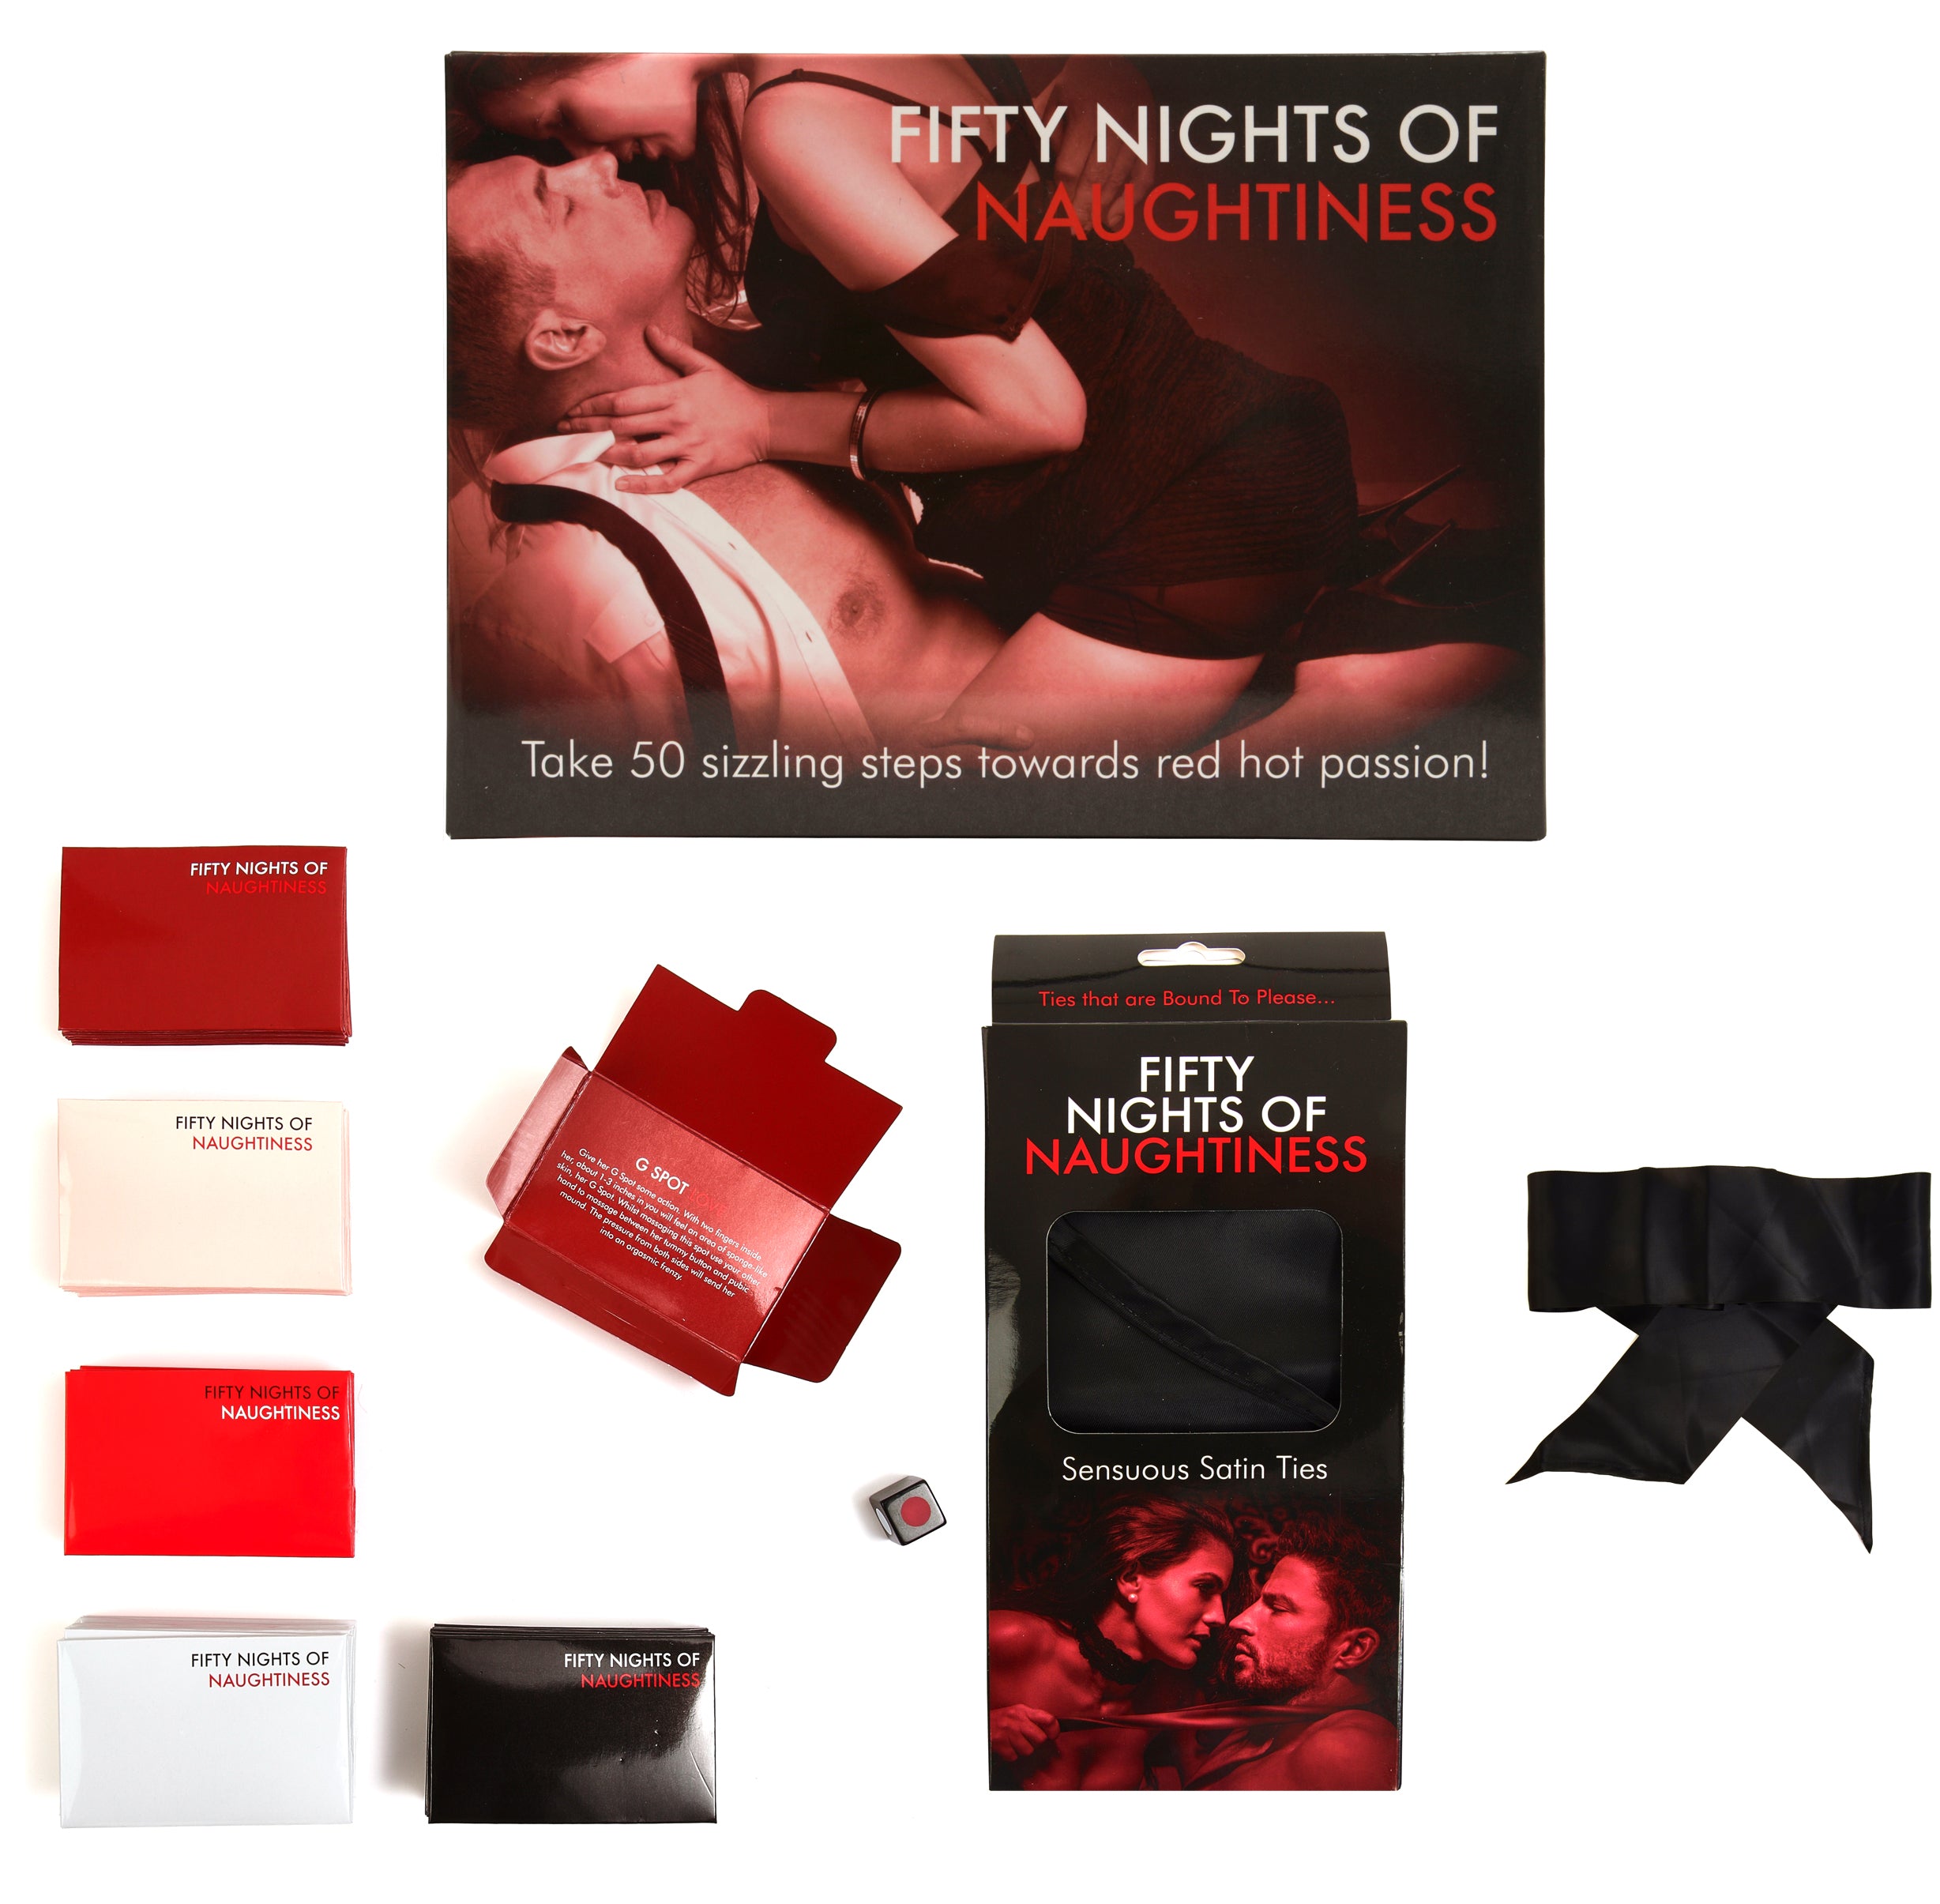 amy hassell recommends fifty nights of naughtiness pic